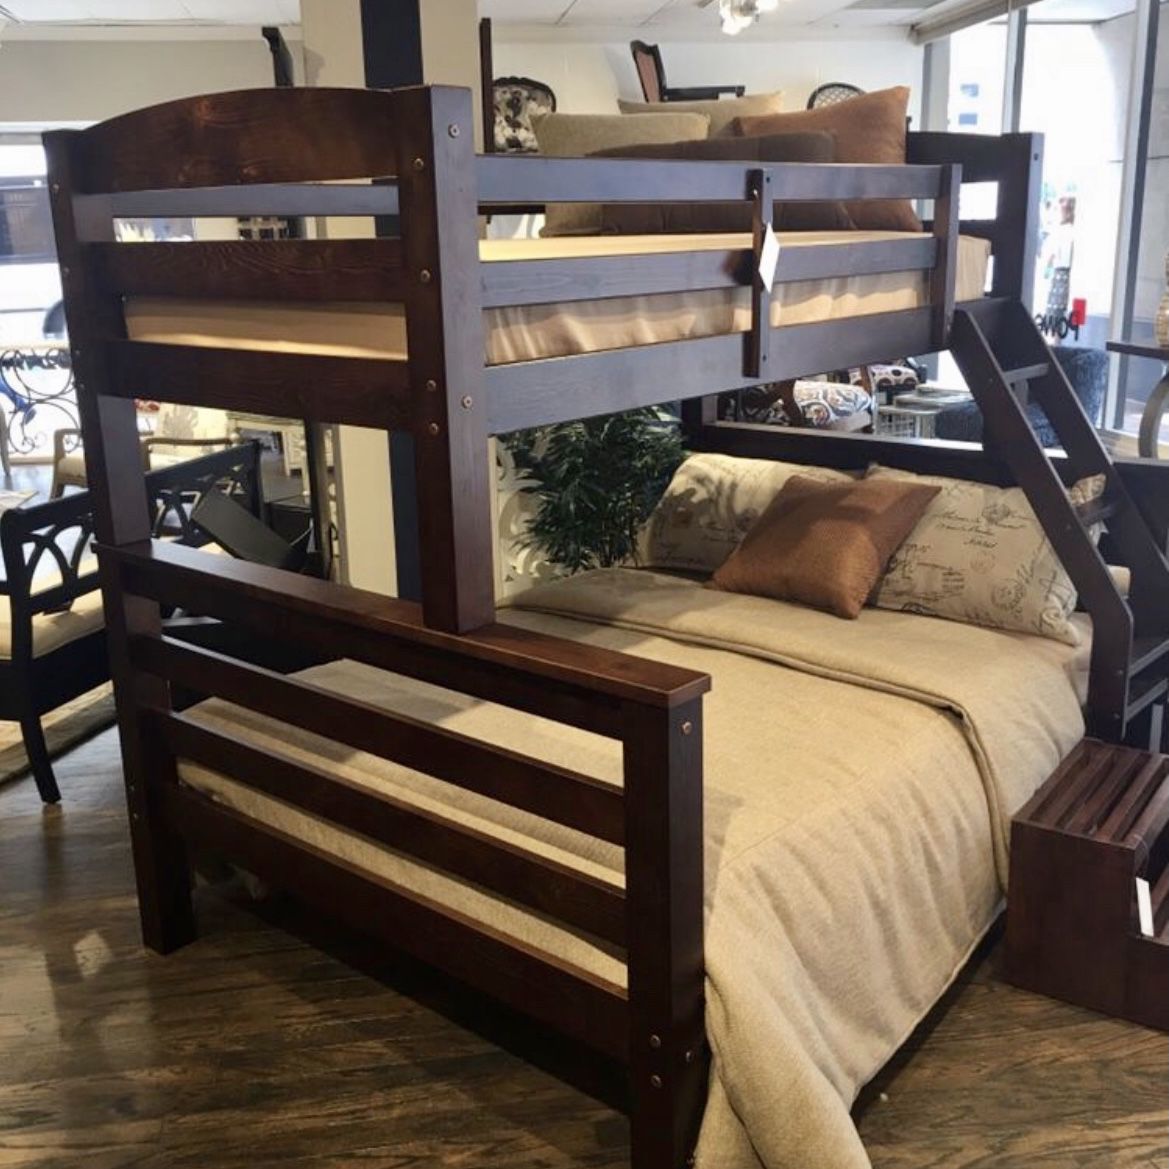 💥HUGE Blowout Furniture Sale!💥 Wood Twin Full Bunk Bed W/ Slats! Brand New In Box! $50 Down Takes It Home Today! 